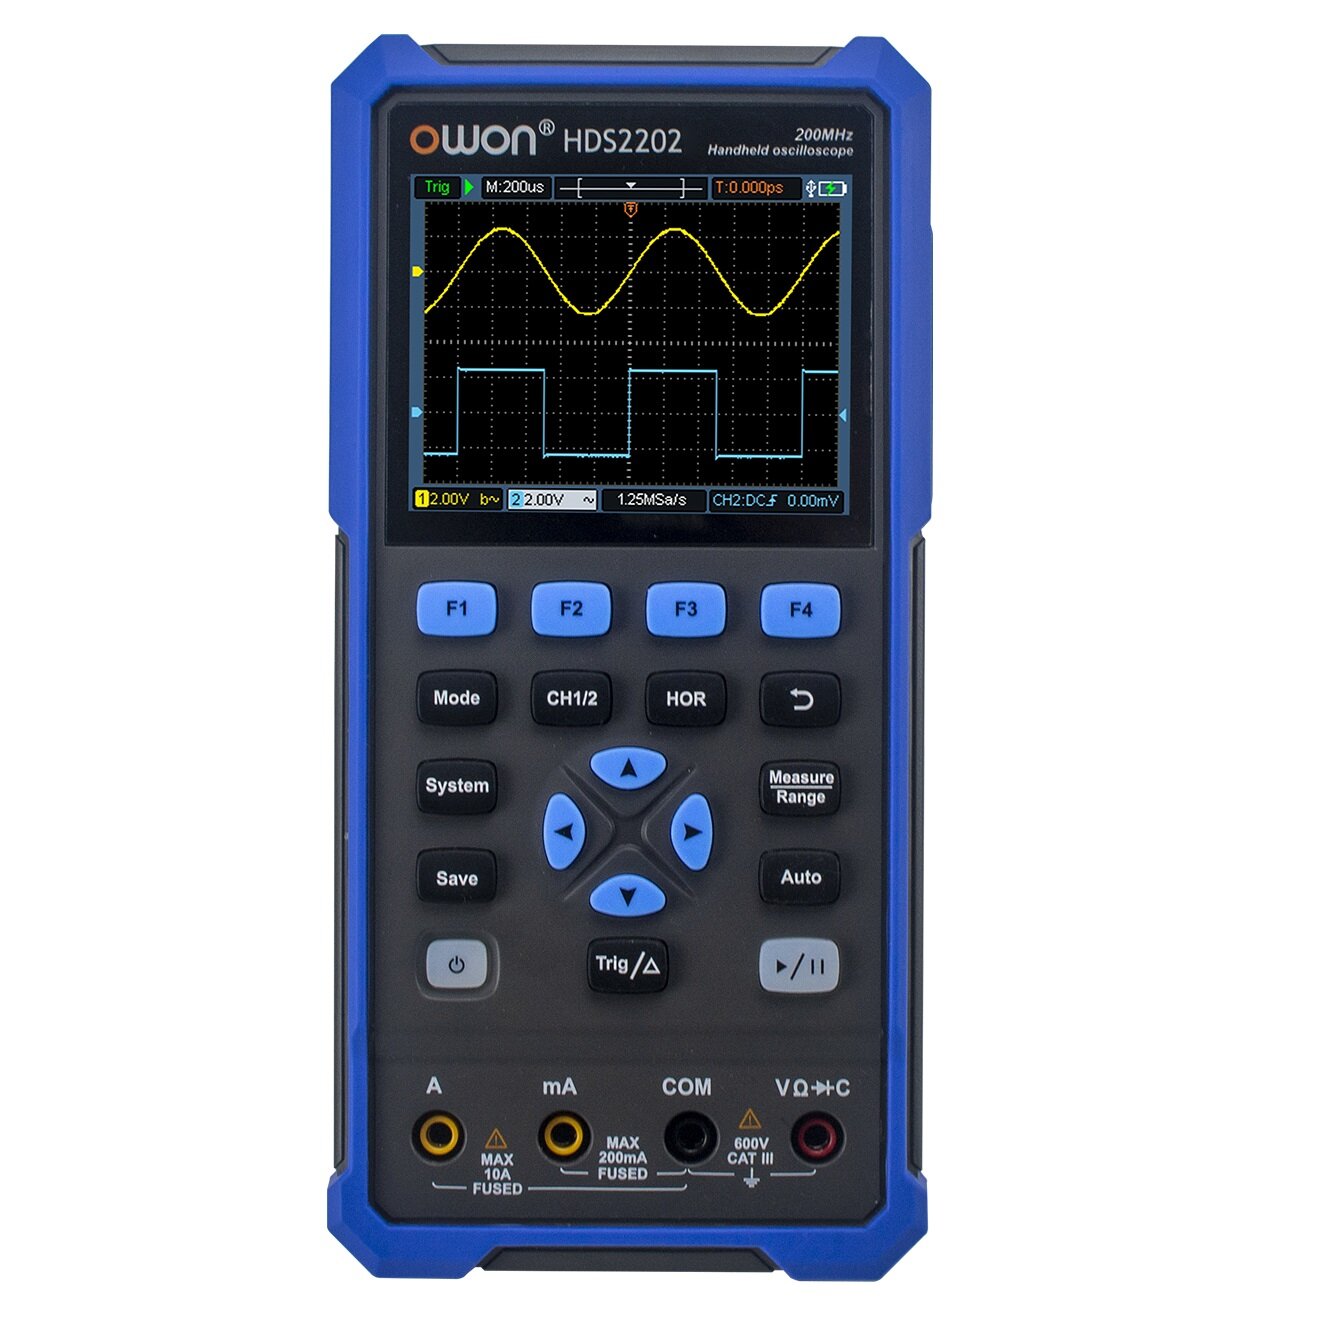 best price,owon,hds2202,2ch,handheld,oscilloscope,200mhz,discount